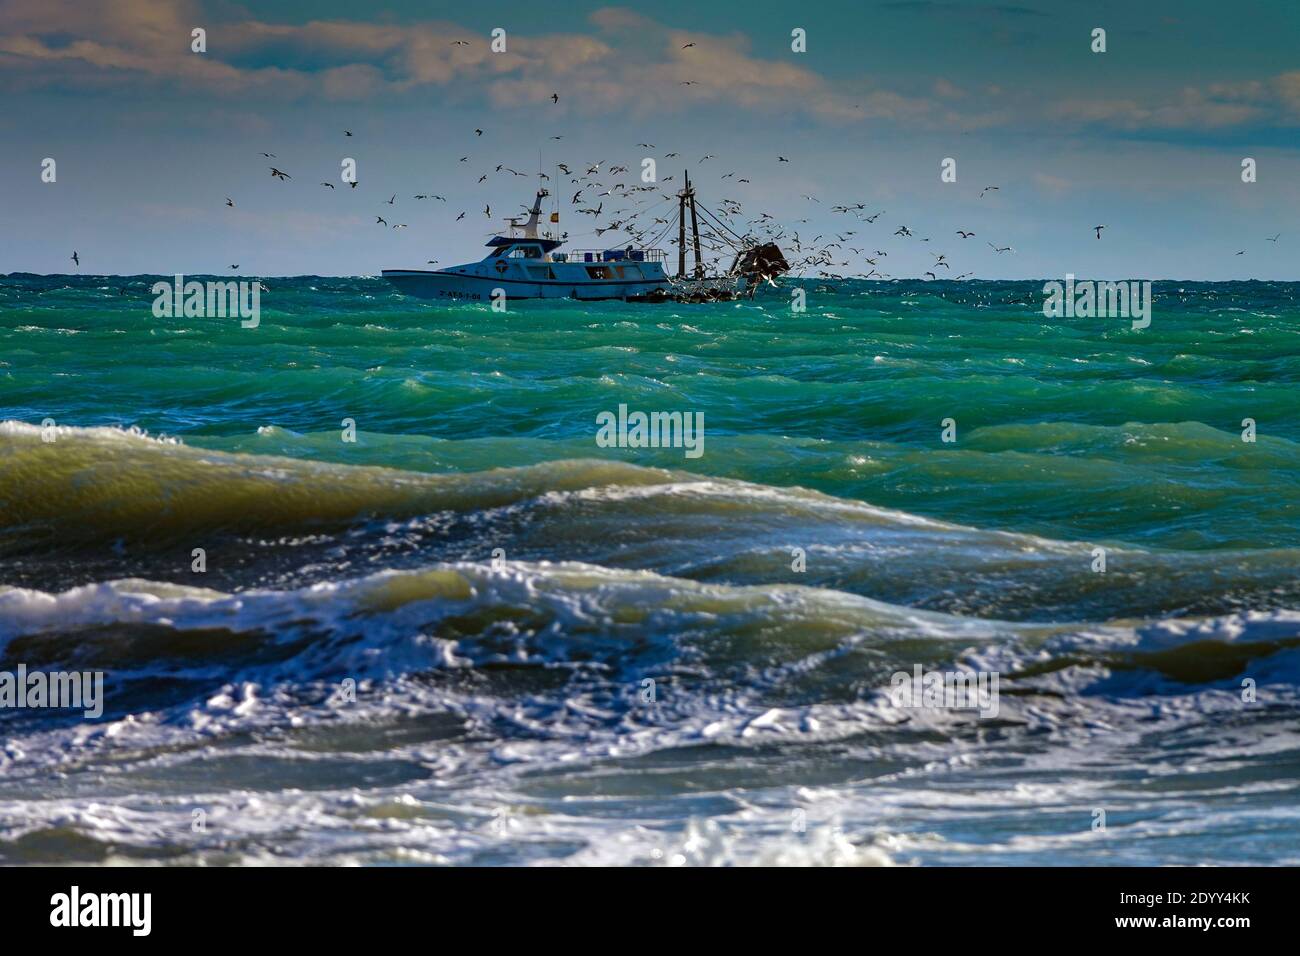 Fishing boat with waves and seagulls, an analogy for Brexit, Calpe, Spain Stock Photo